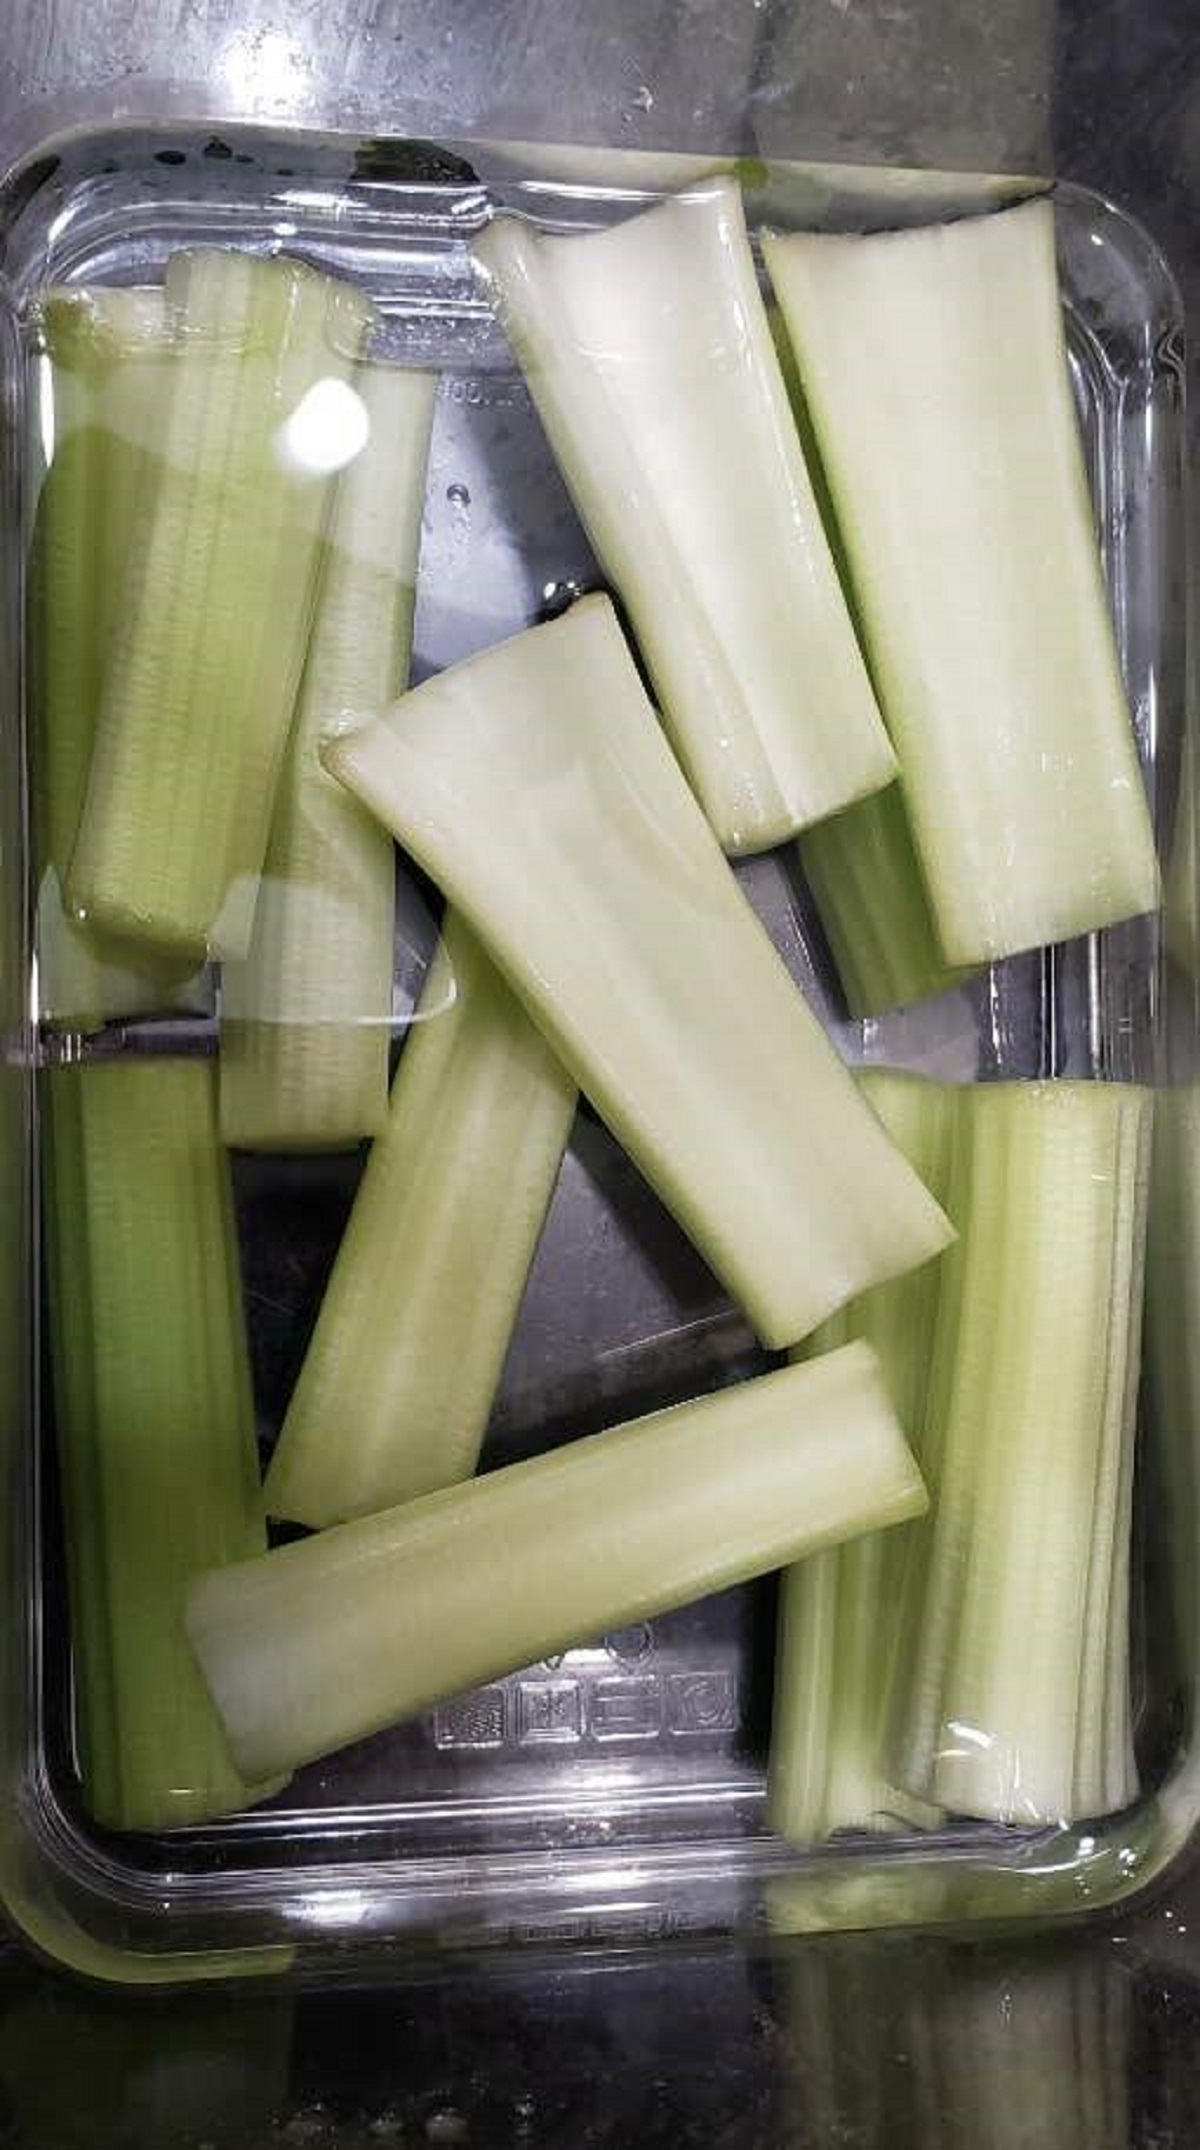 "Cut celery and place it in water for storage. Lasts longer and stays crispier."